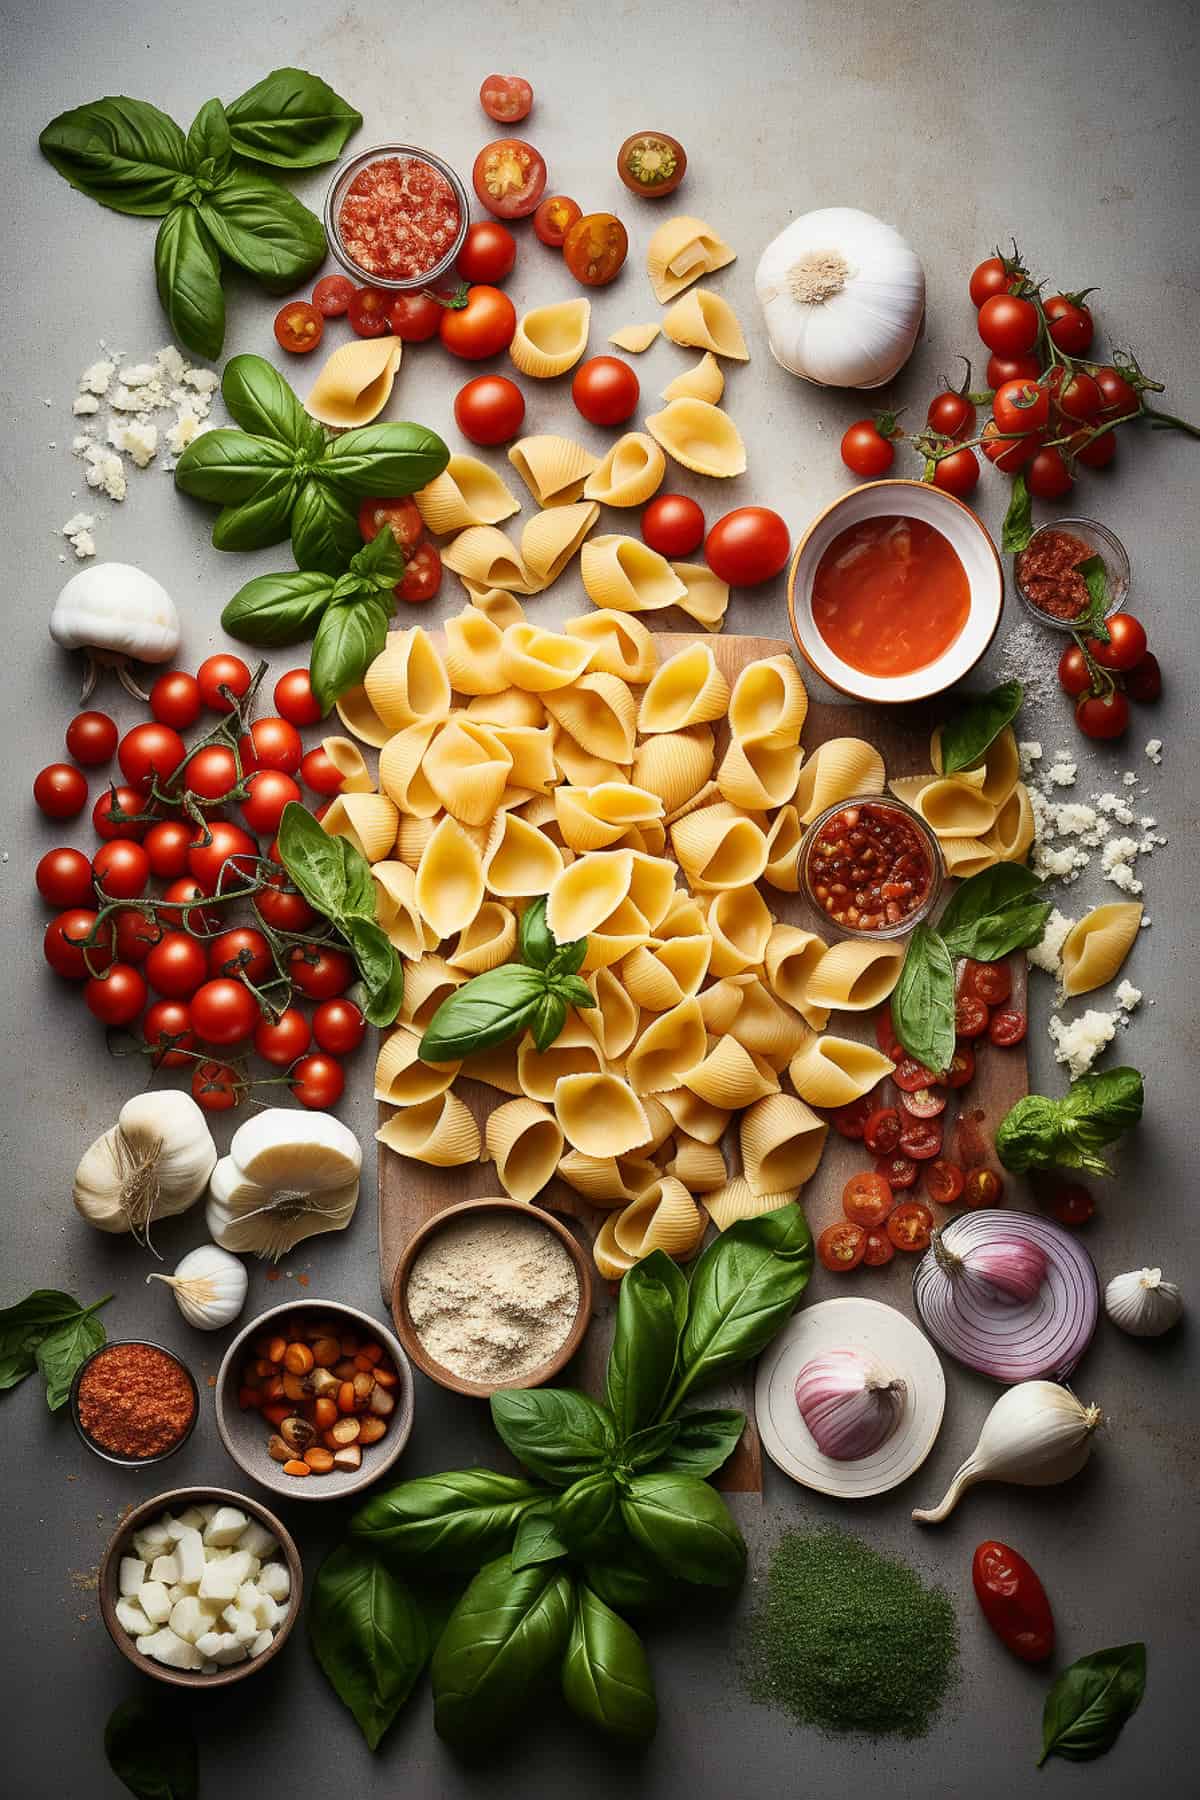 Ingredients for stuffed pasta shells.